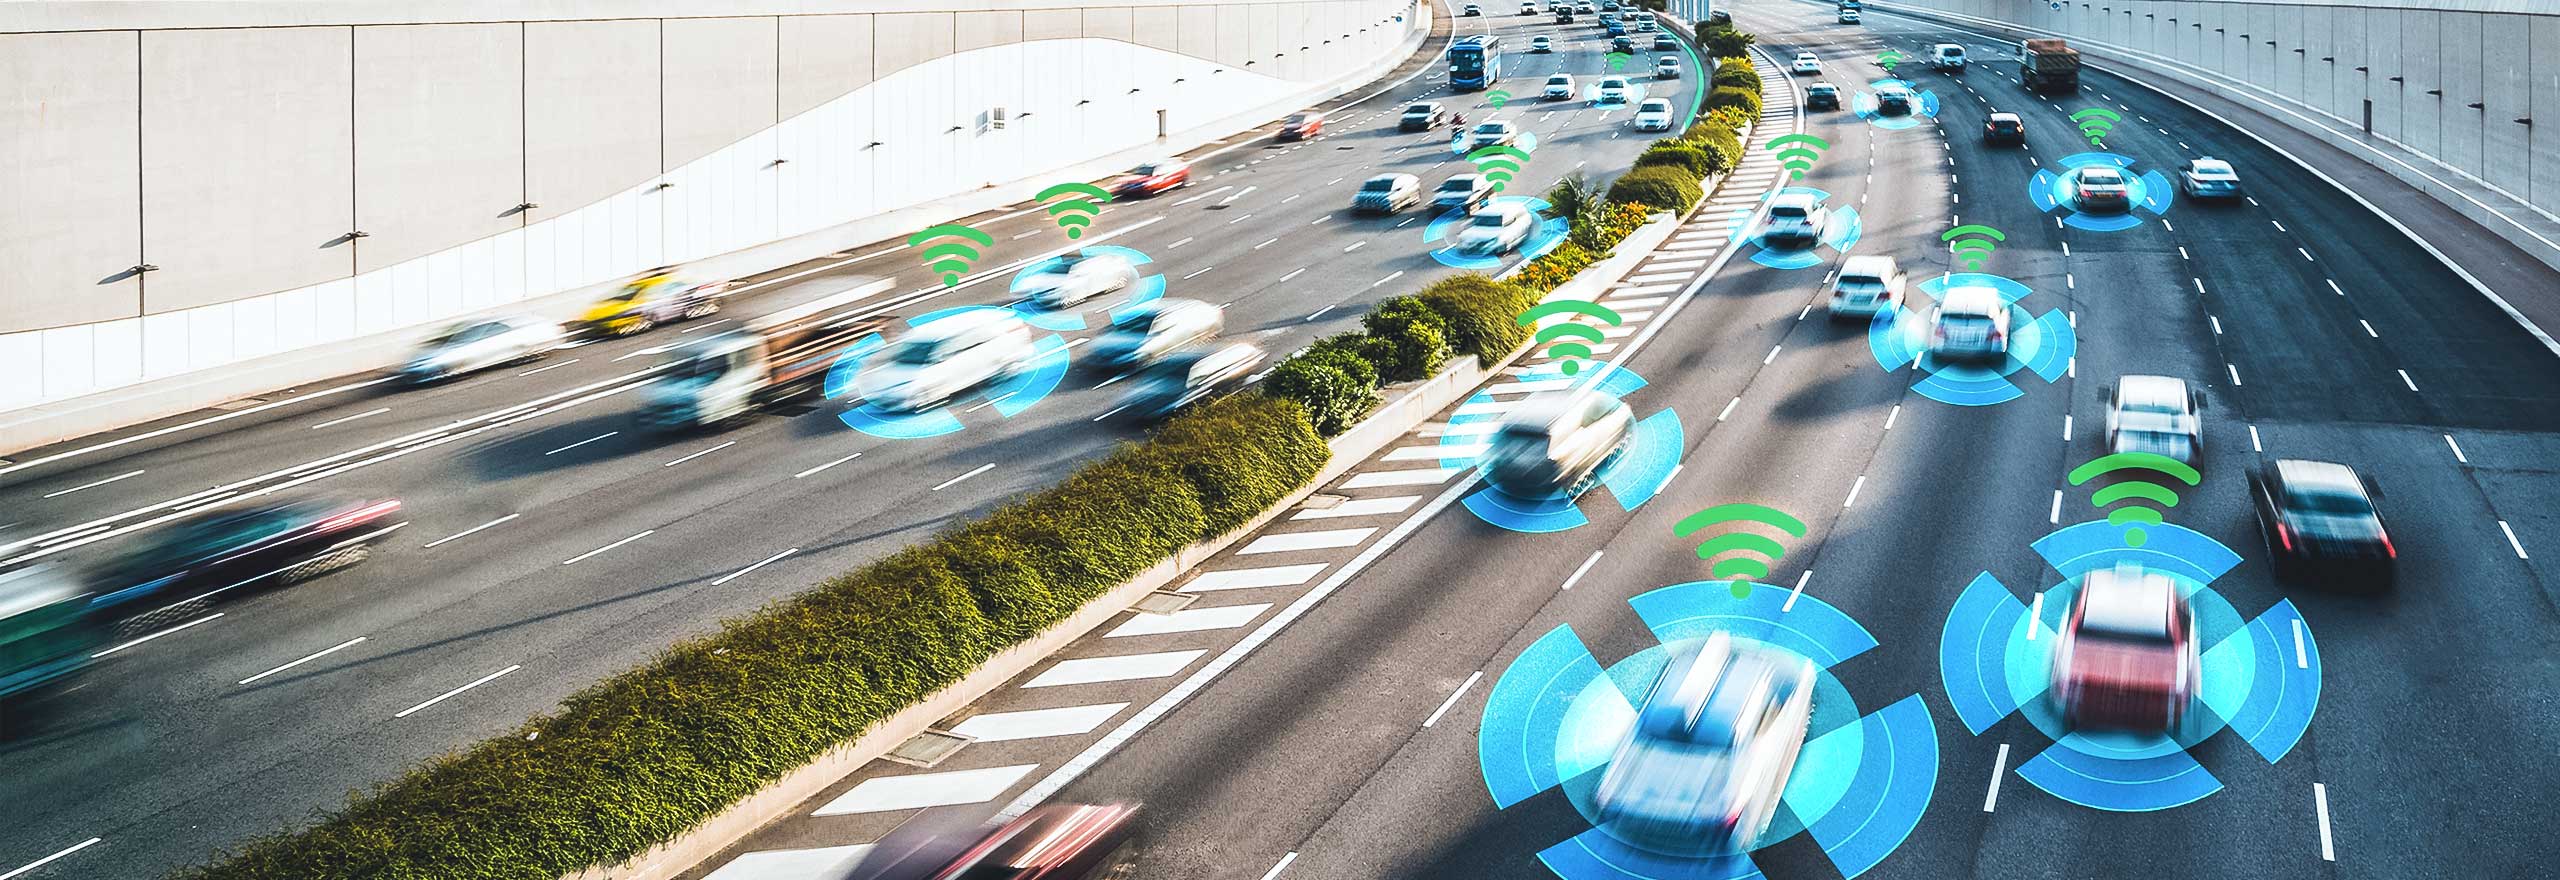 Cars on a highway being analysed by Hexagon's autonomous vehicle perception solutions